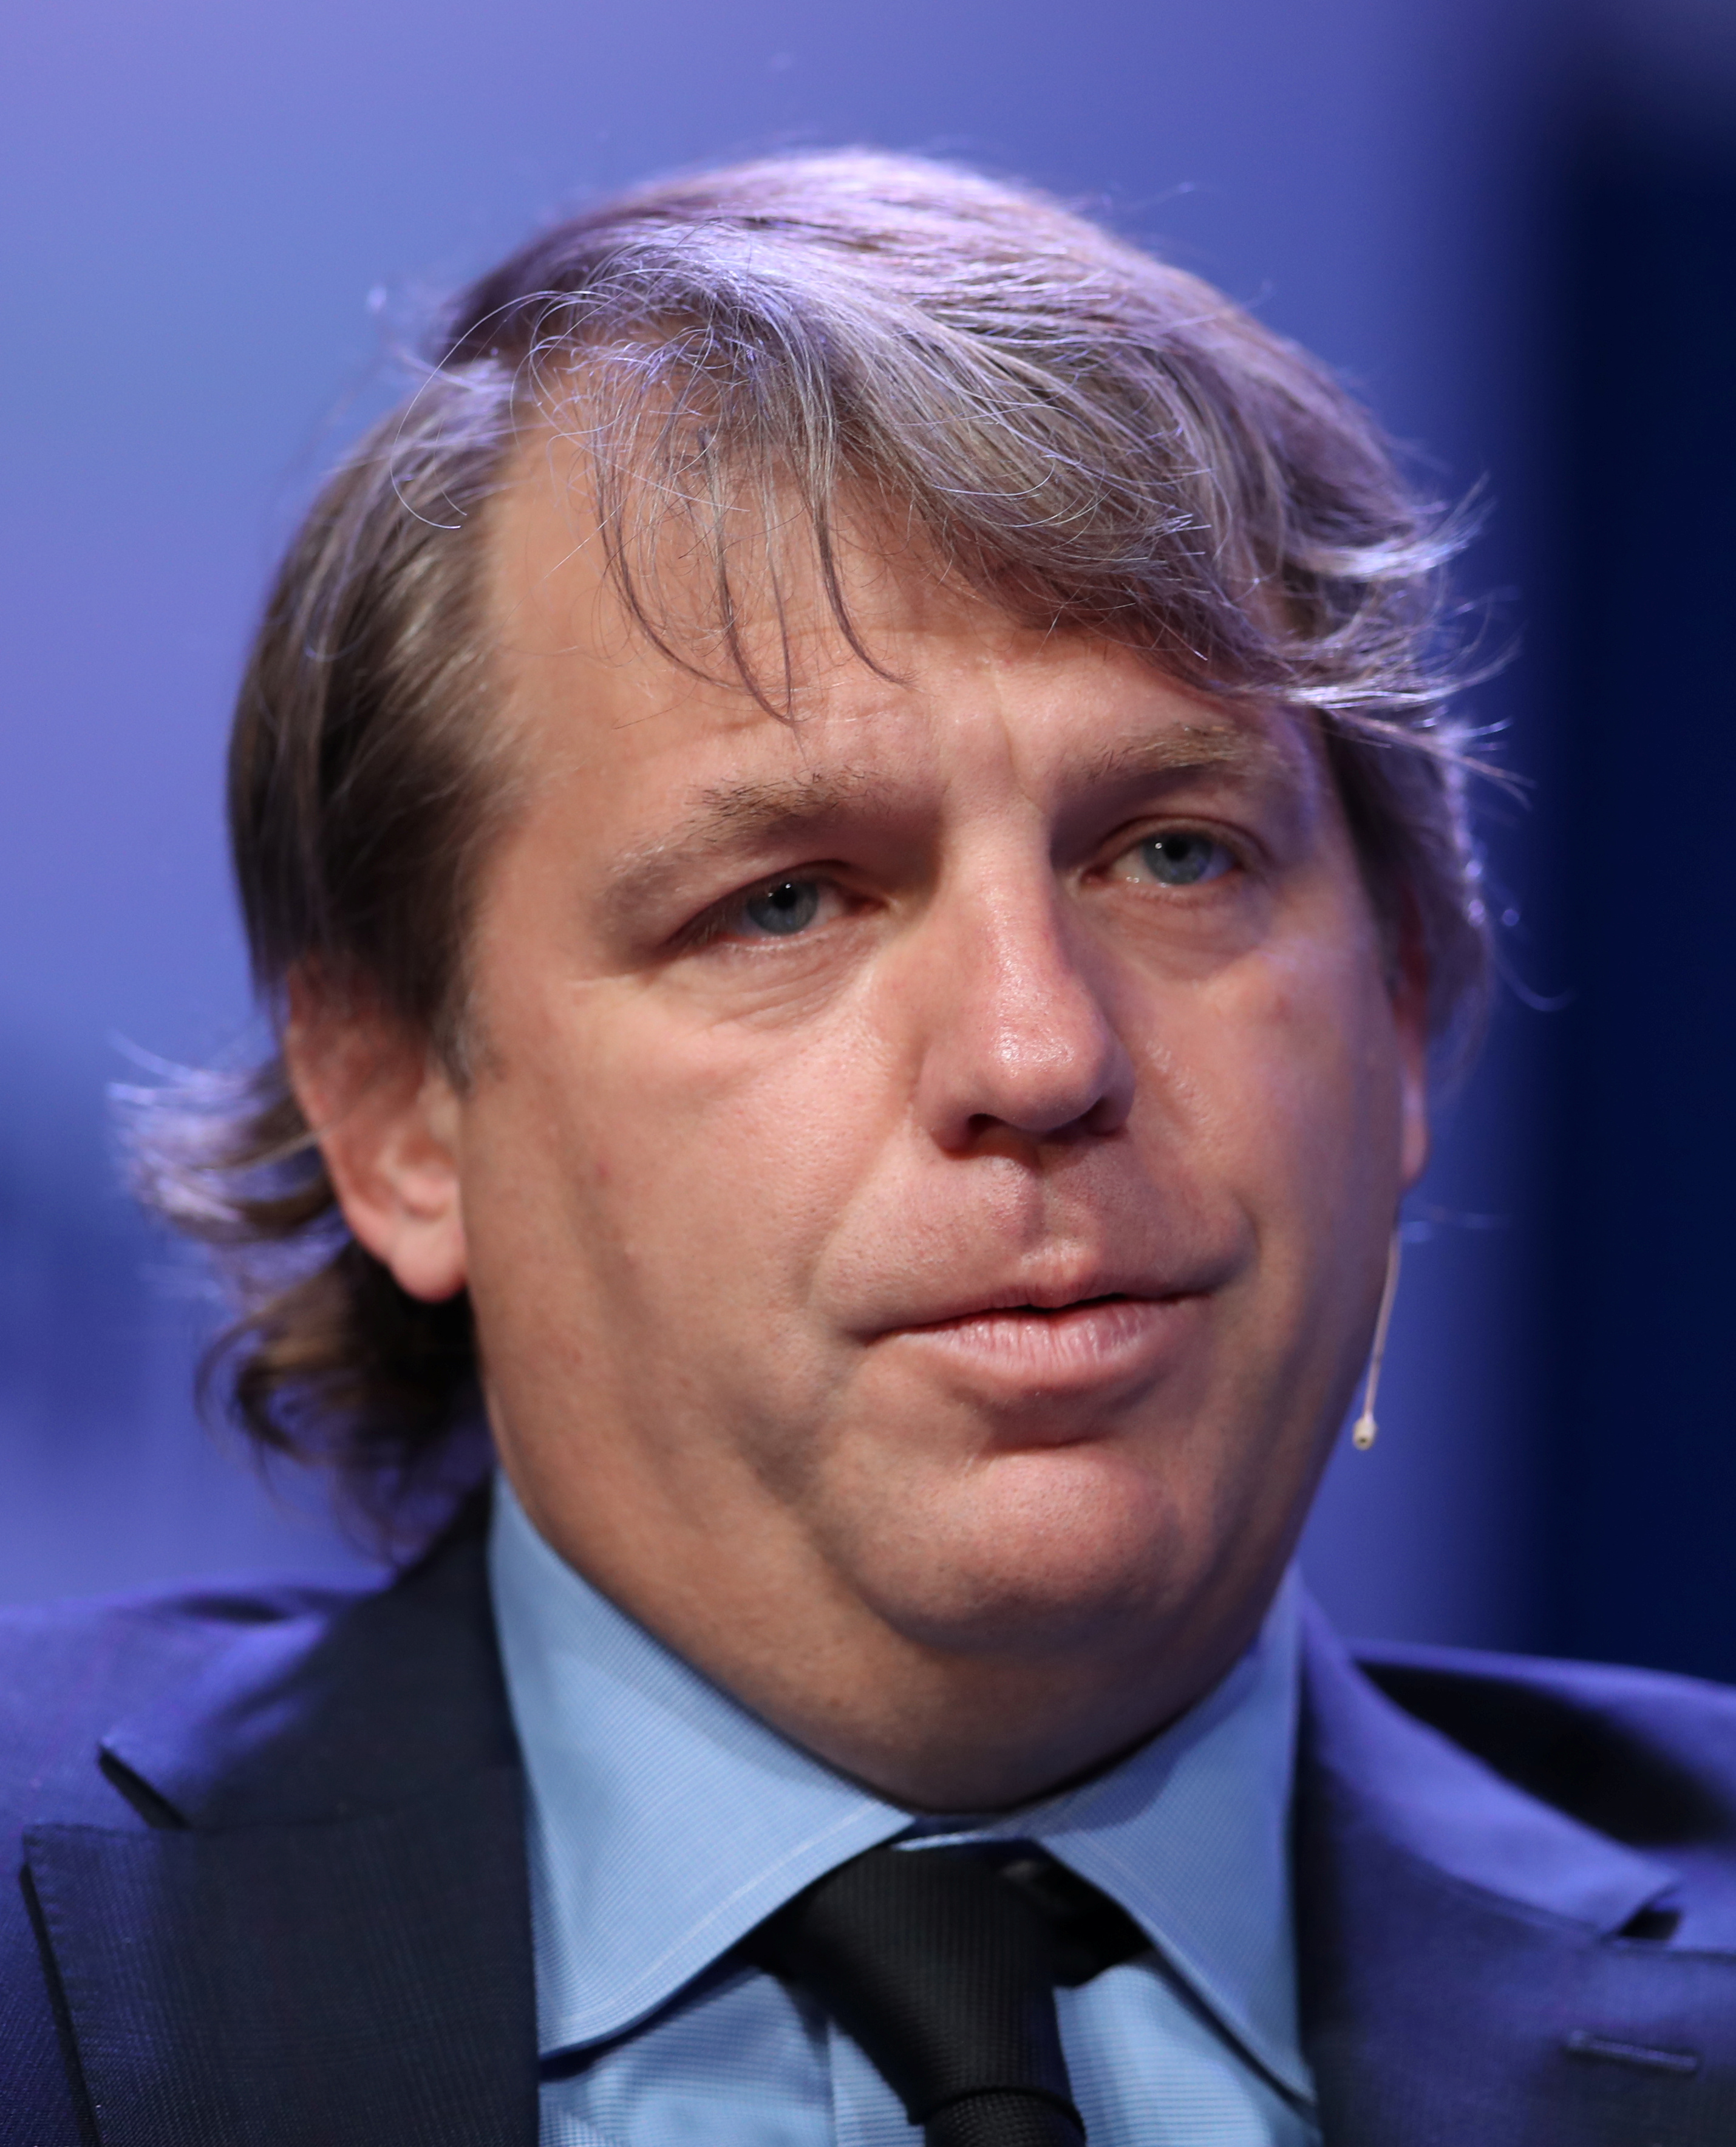 Todd Boehly, Chairman and CEO, Eldridge Industries, speaks at the 2019 Milken Institute Global Conference in Beverly Hills